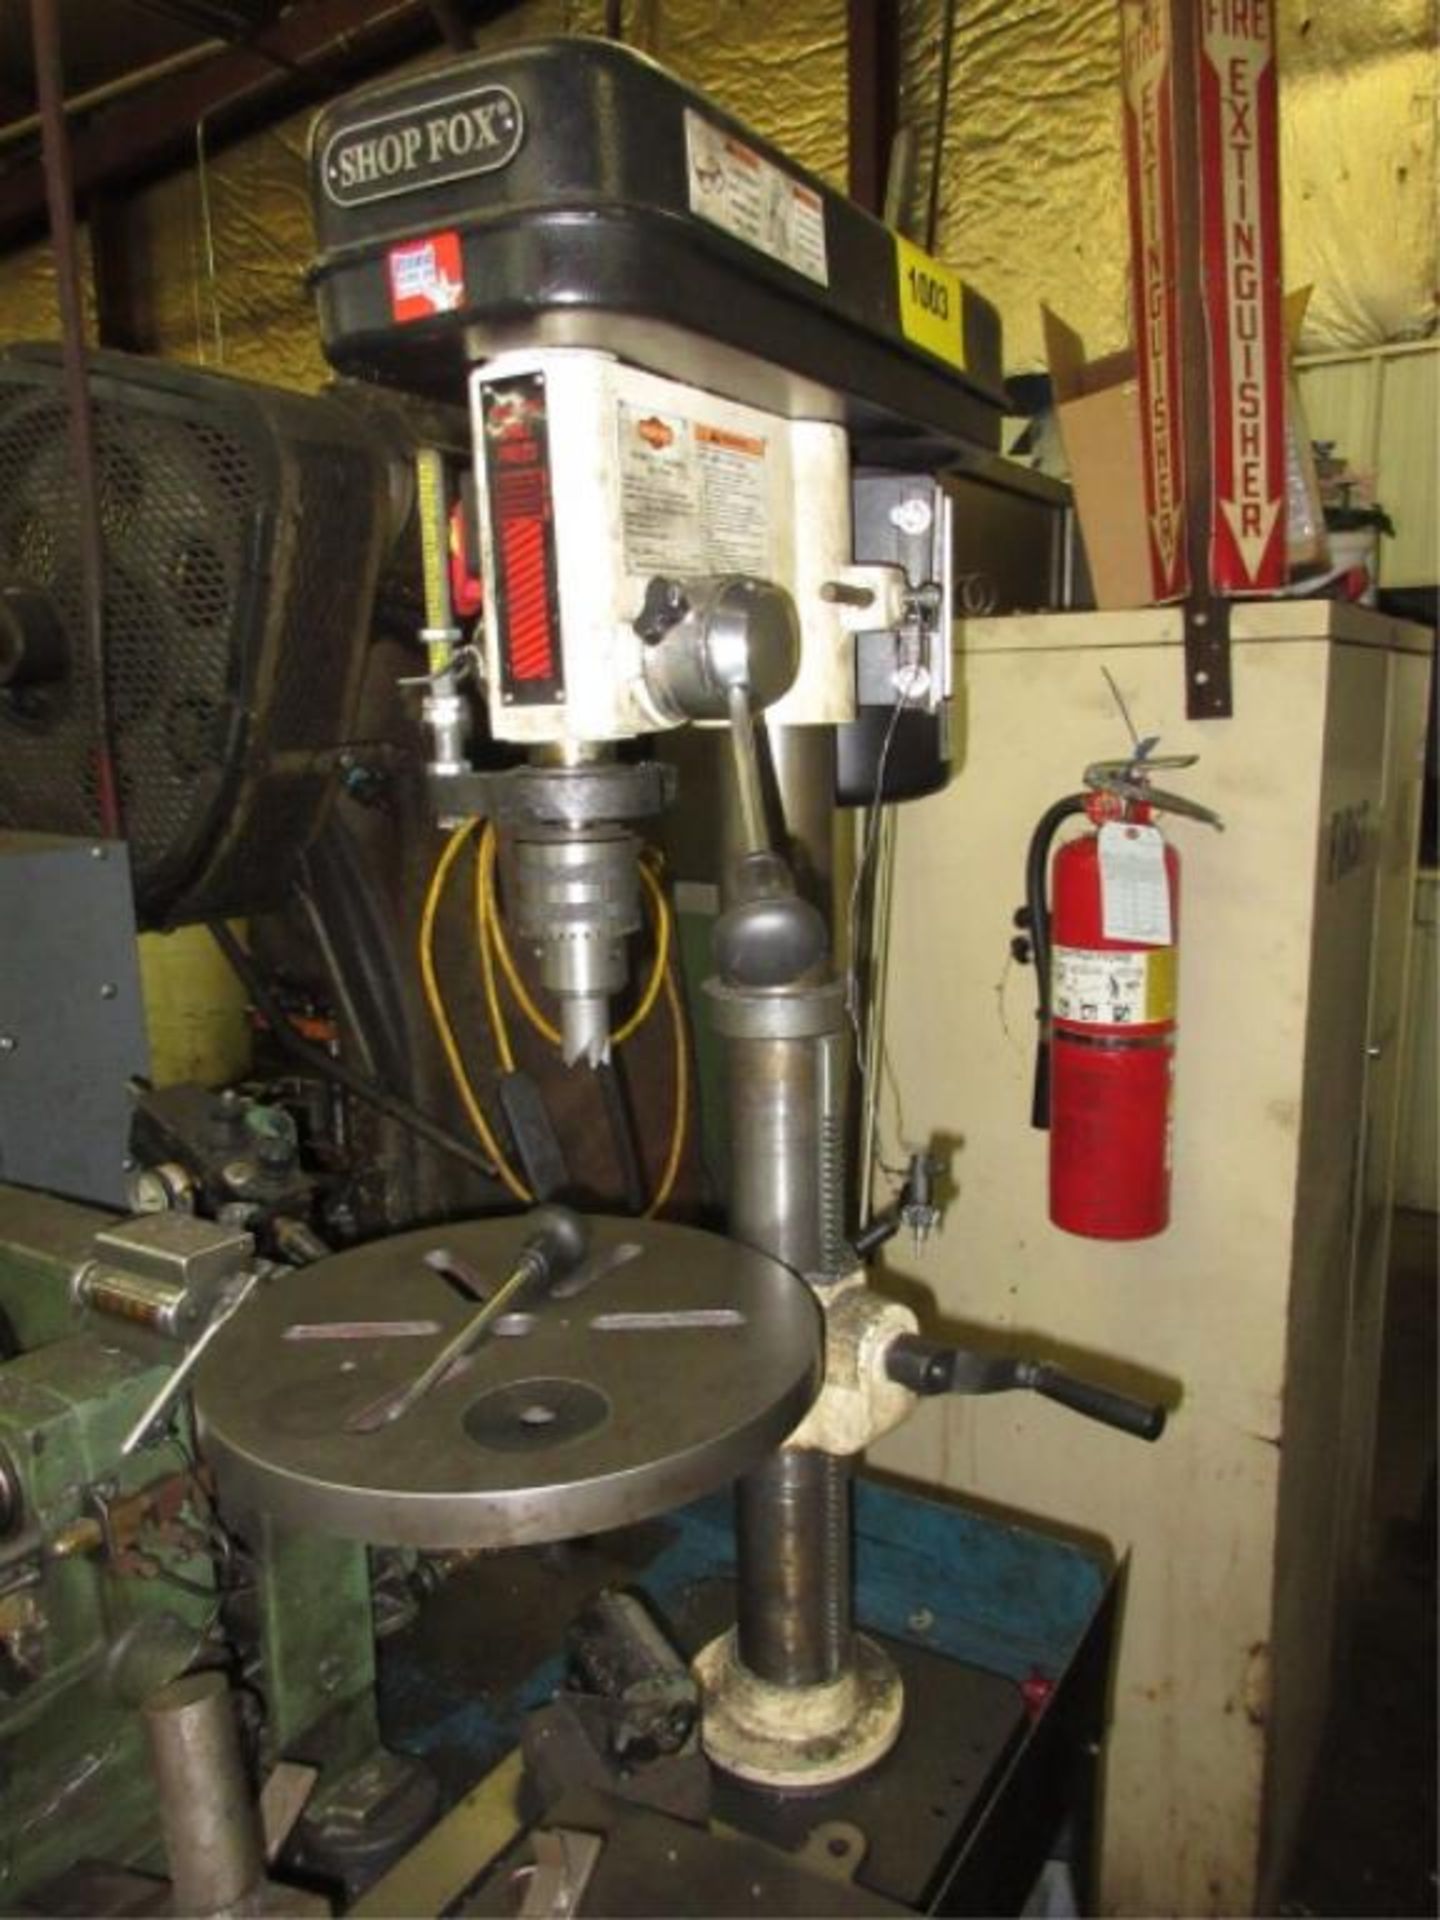 Shop Fox Drill Press. Shop Fox W1668 13" Bench Type Oscillating Drill Press, (2006), 3/4 hp, spindle - Image 2 of 2